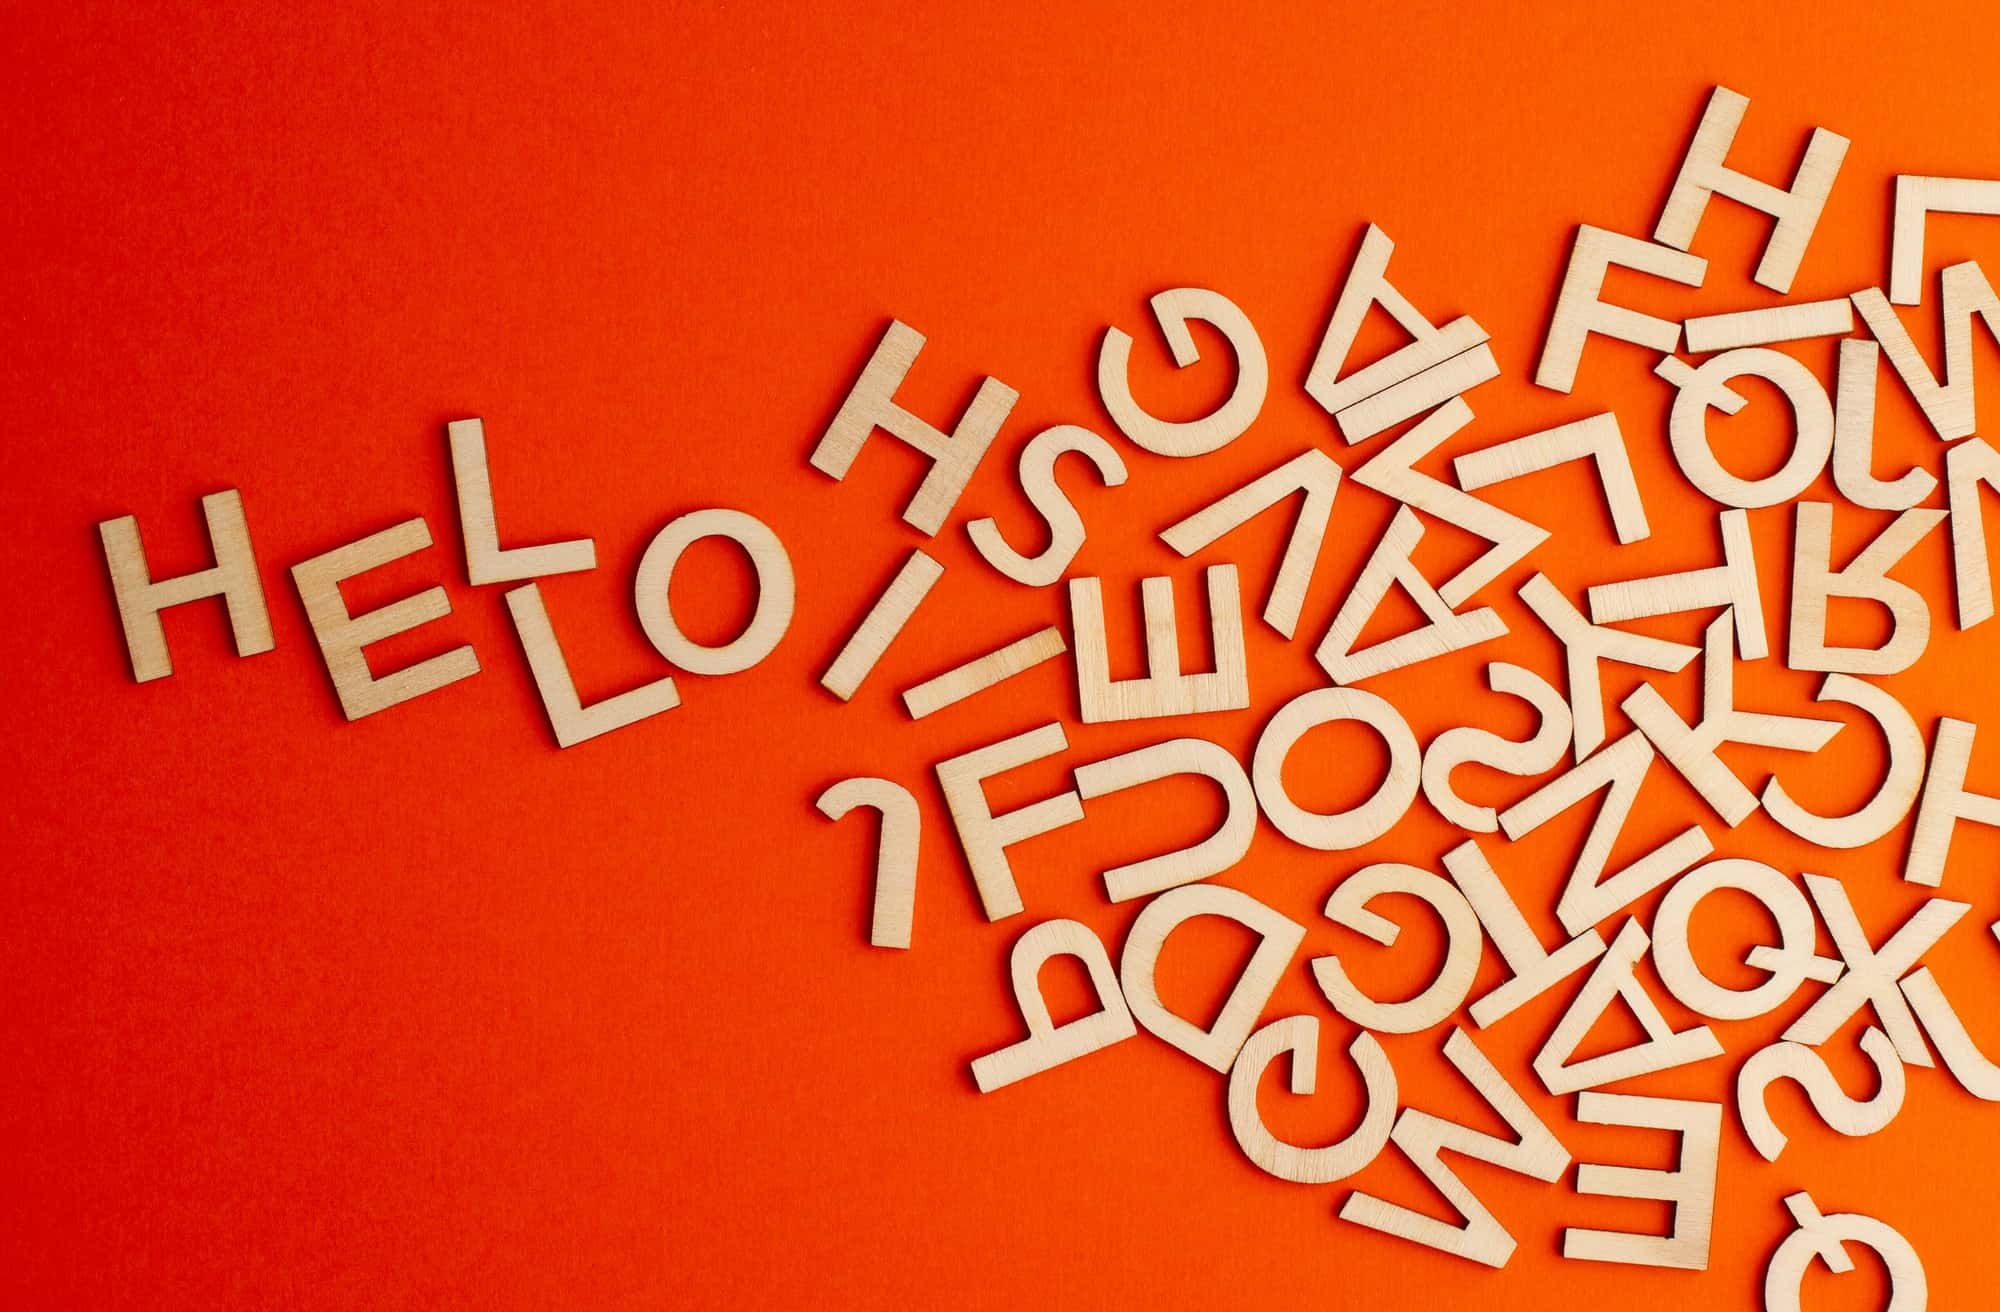 wooden cut alphabet letters on orange background spelling the word hello